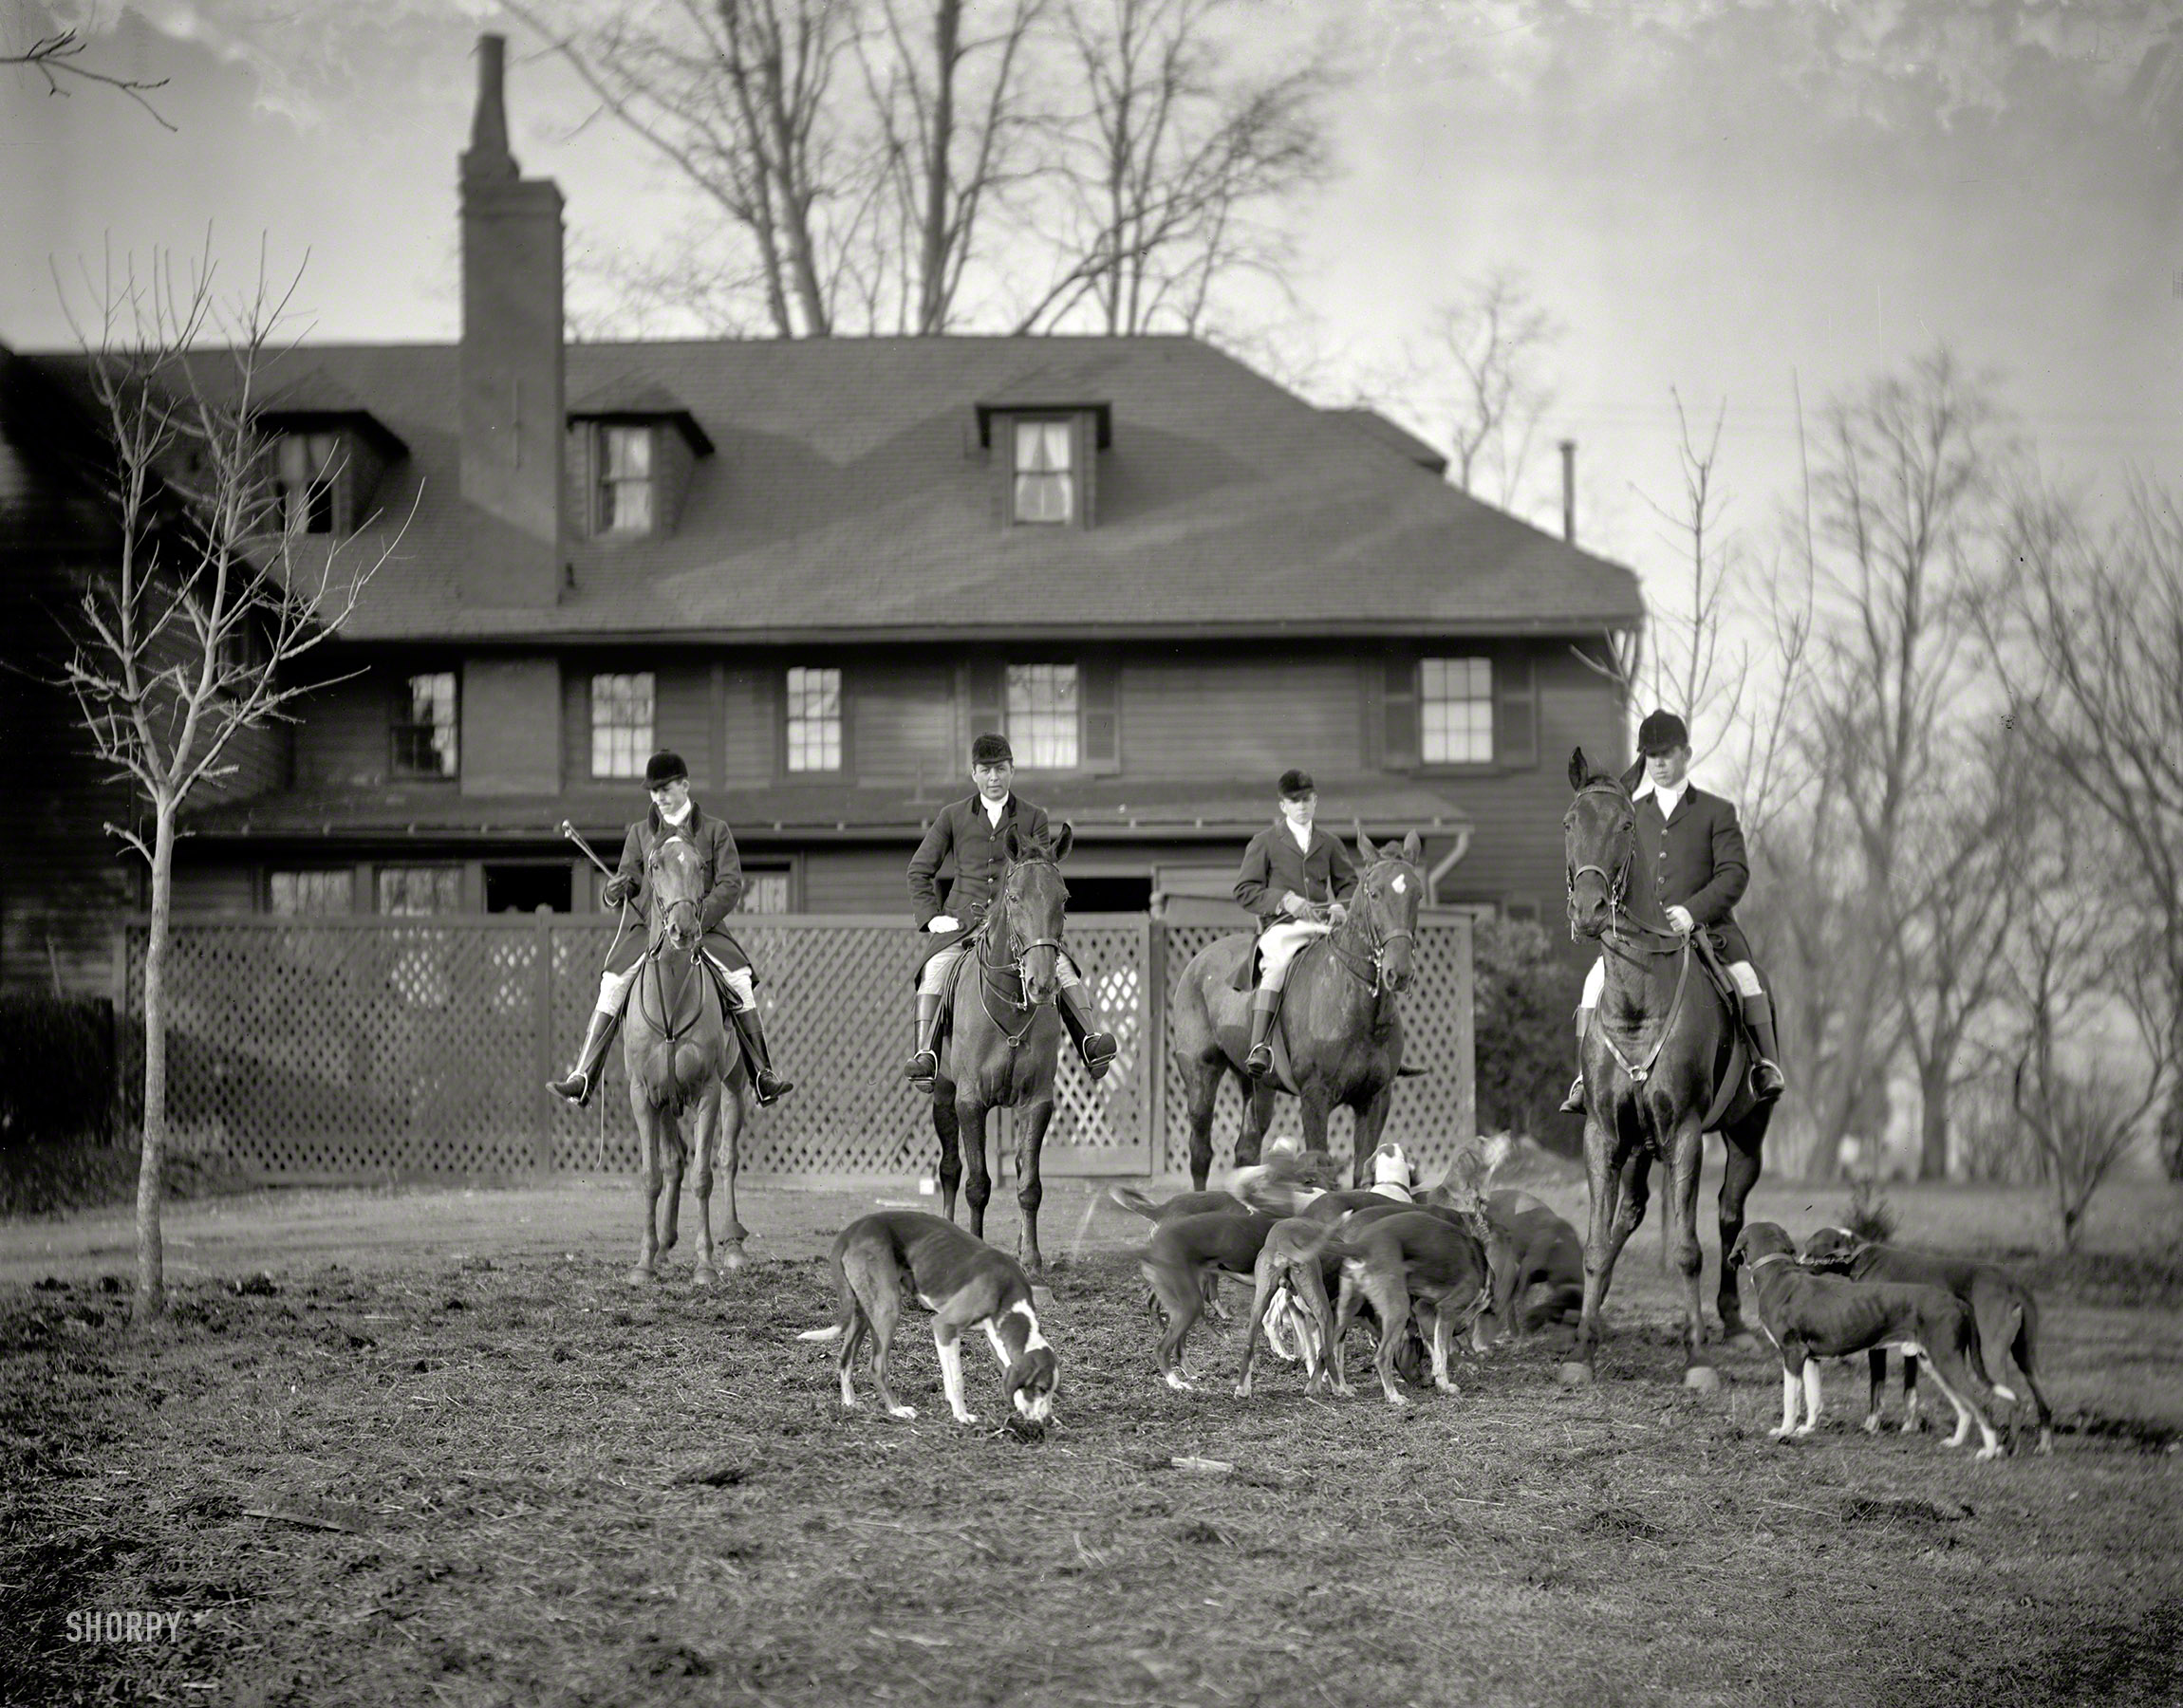 Washington, D.C., or vicinity ca. 1918. "Hunting scene" is the not terribly specific label for this sporting view. Harris & Ewing glass negative. View full size.